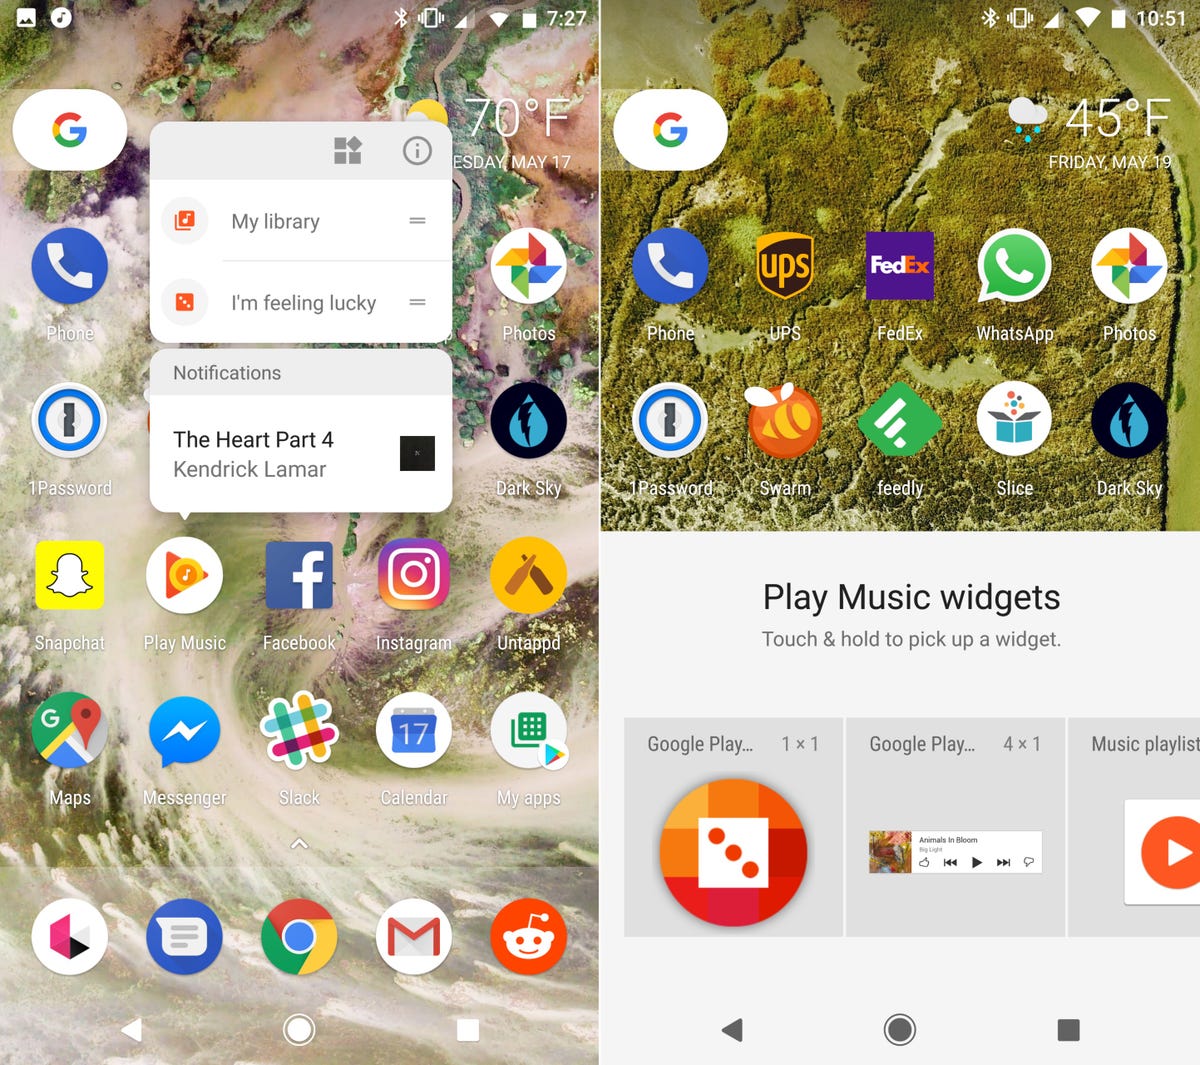 android-o-features-quick-actions-and-widgets.jpg